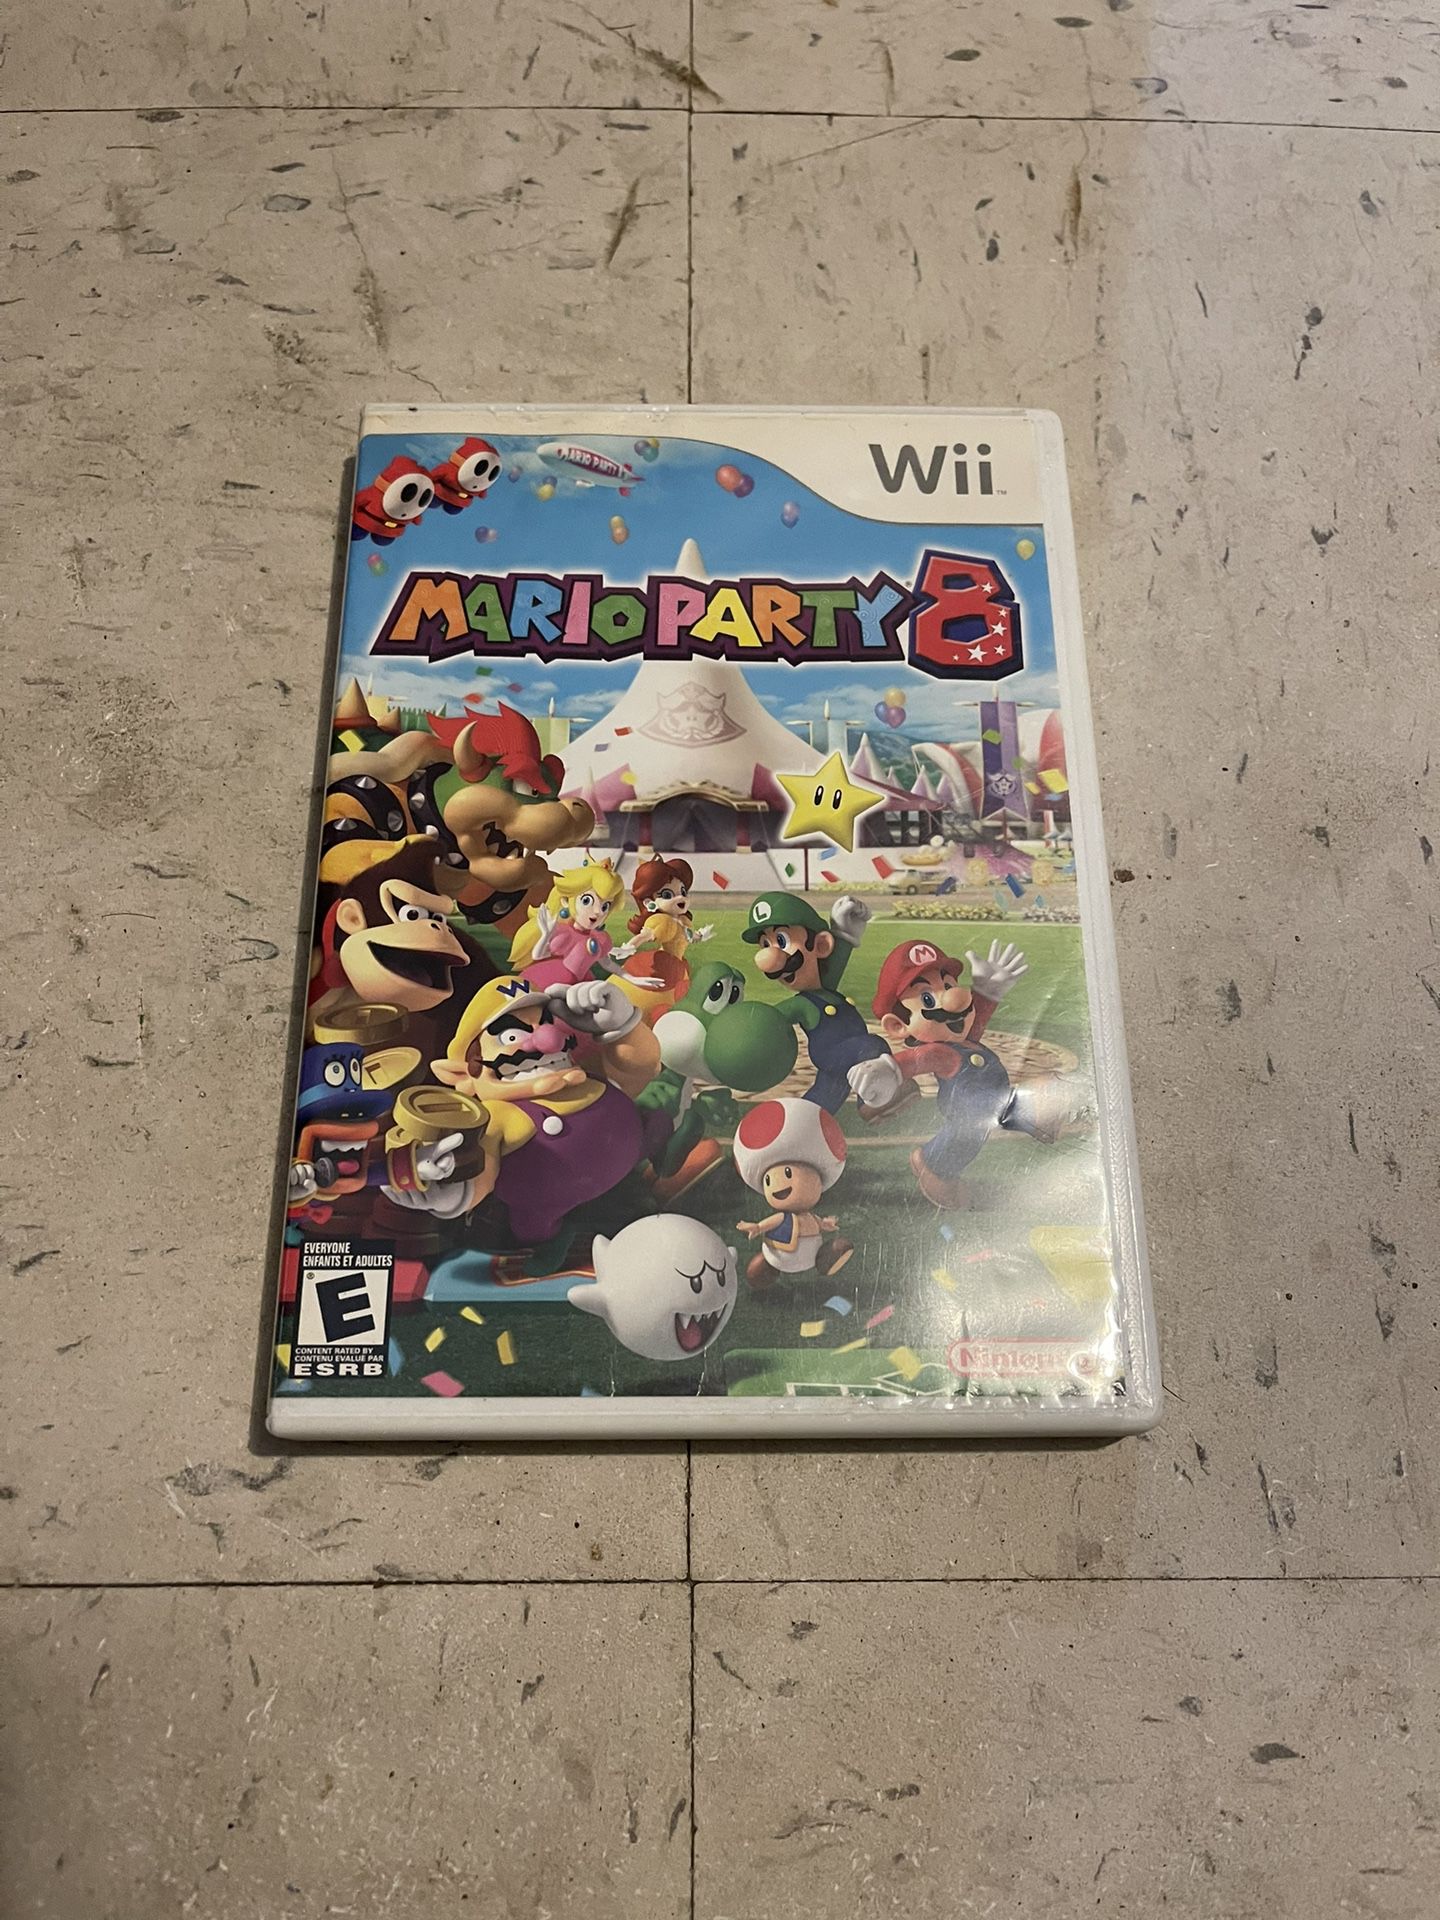 Mario Party 8 (ONLY CASE)